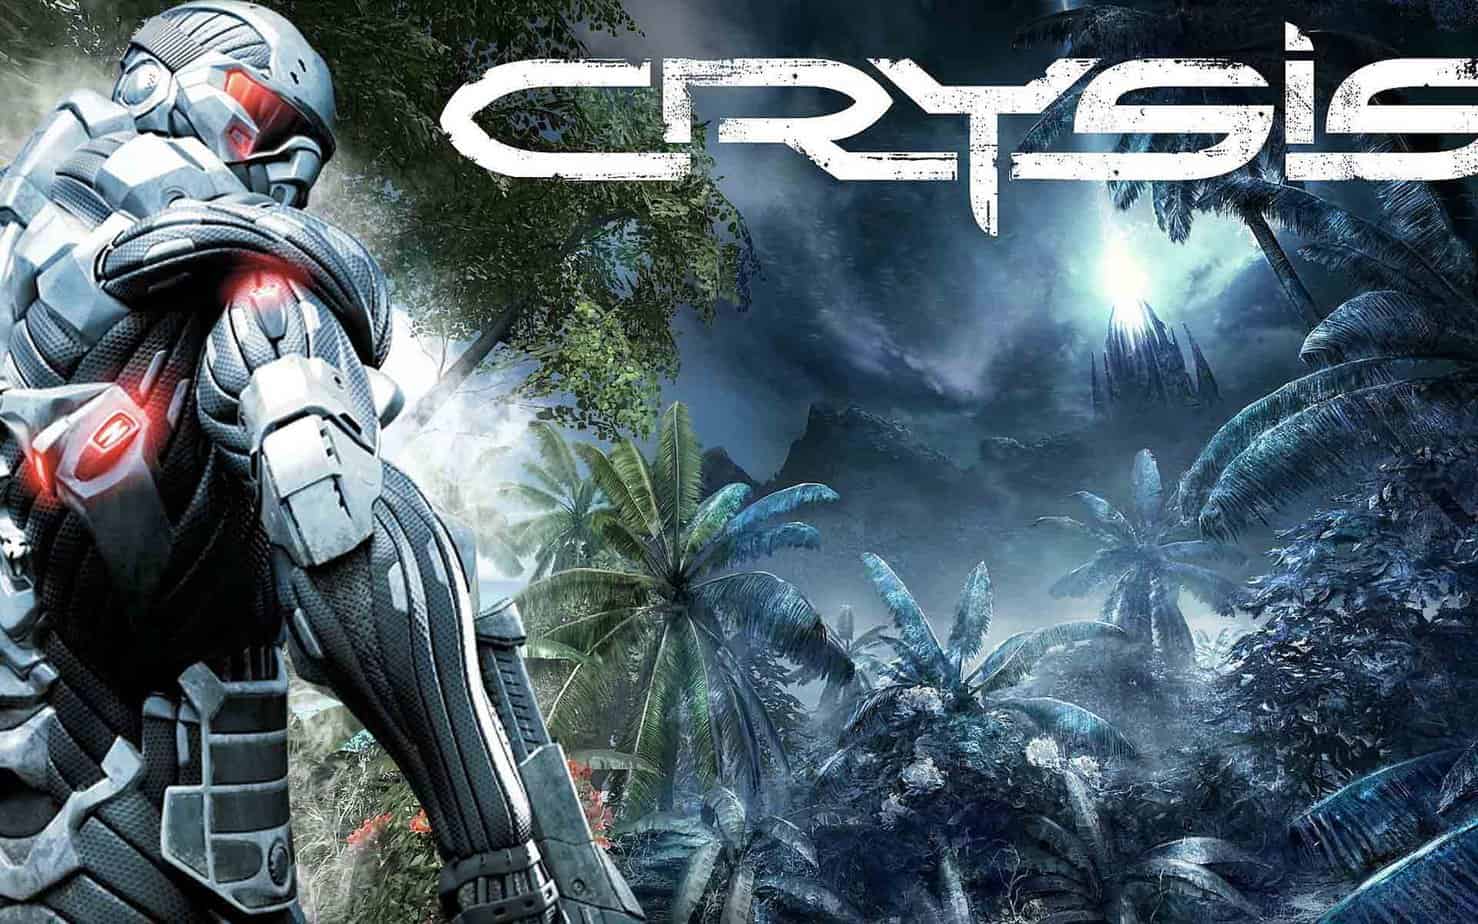 Crysis Remastered Coming to (Hopefully) Not Break Your PC